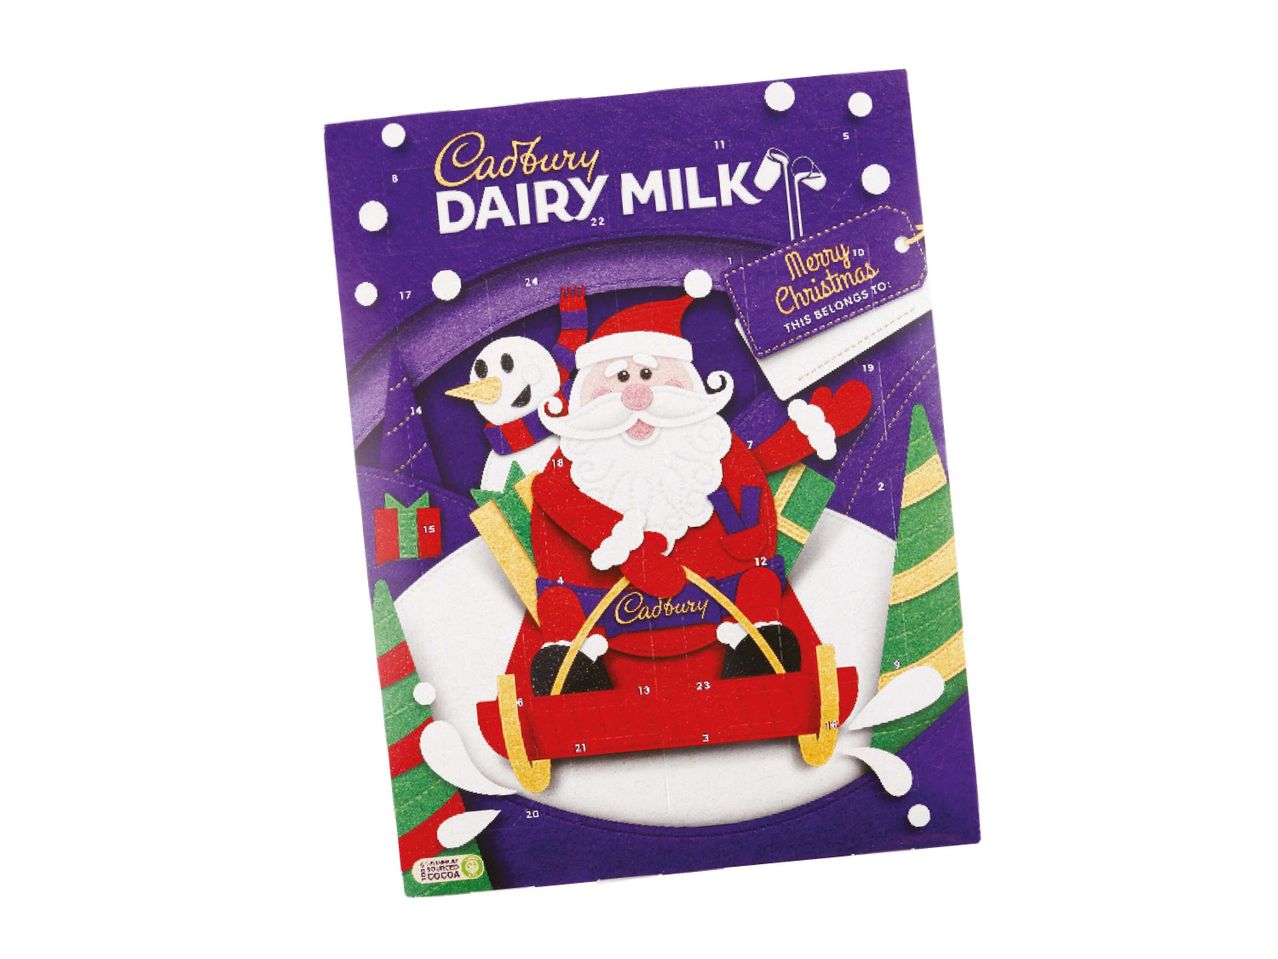 Go to full screen view: Dairy Milk Advent Calendar - Image 1